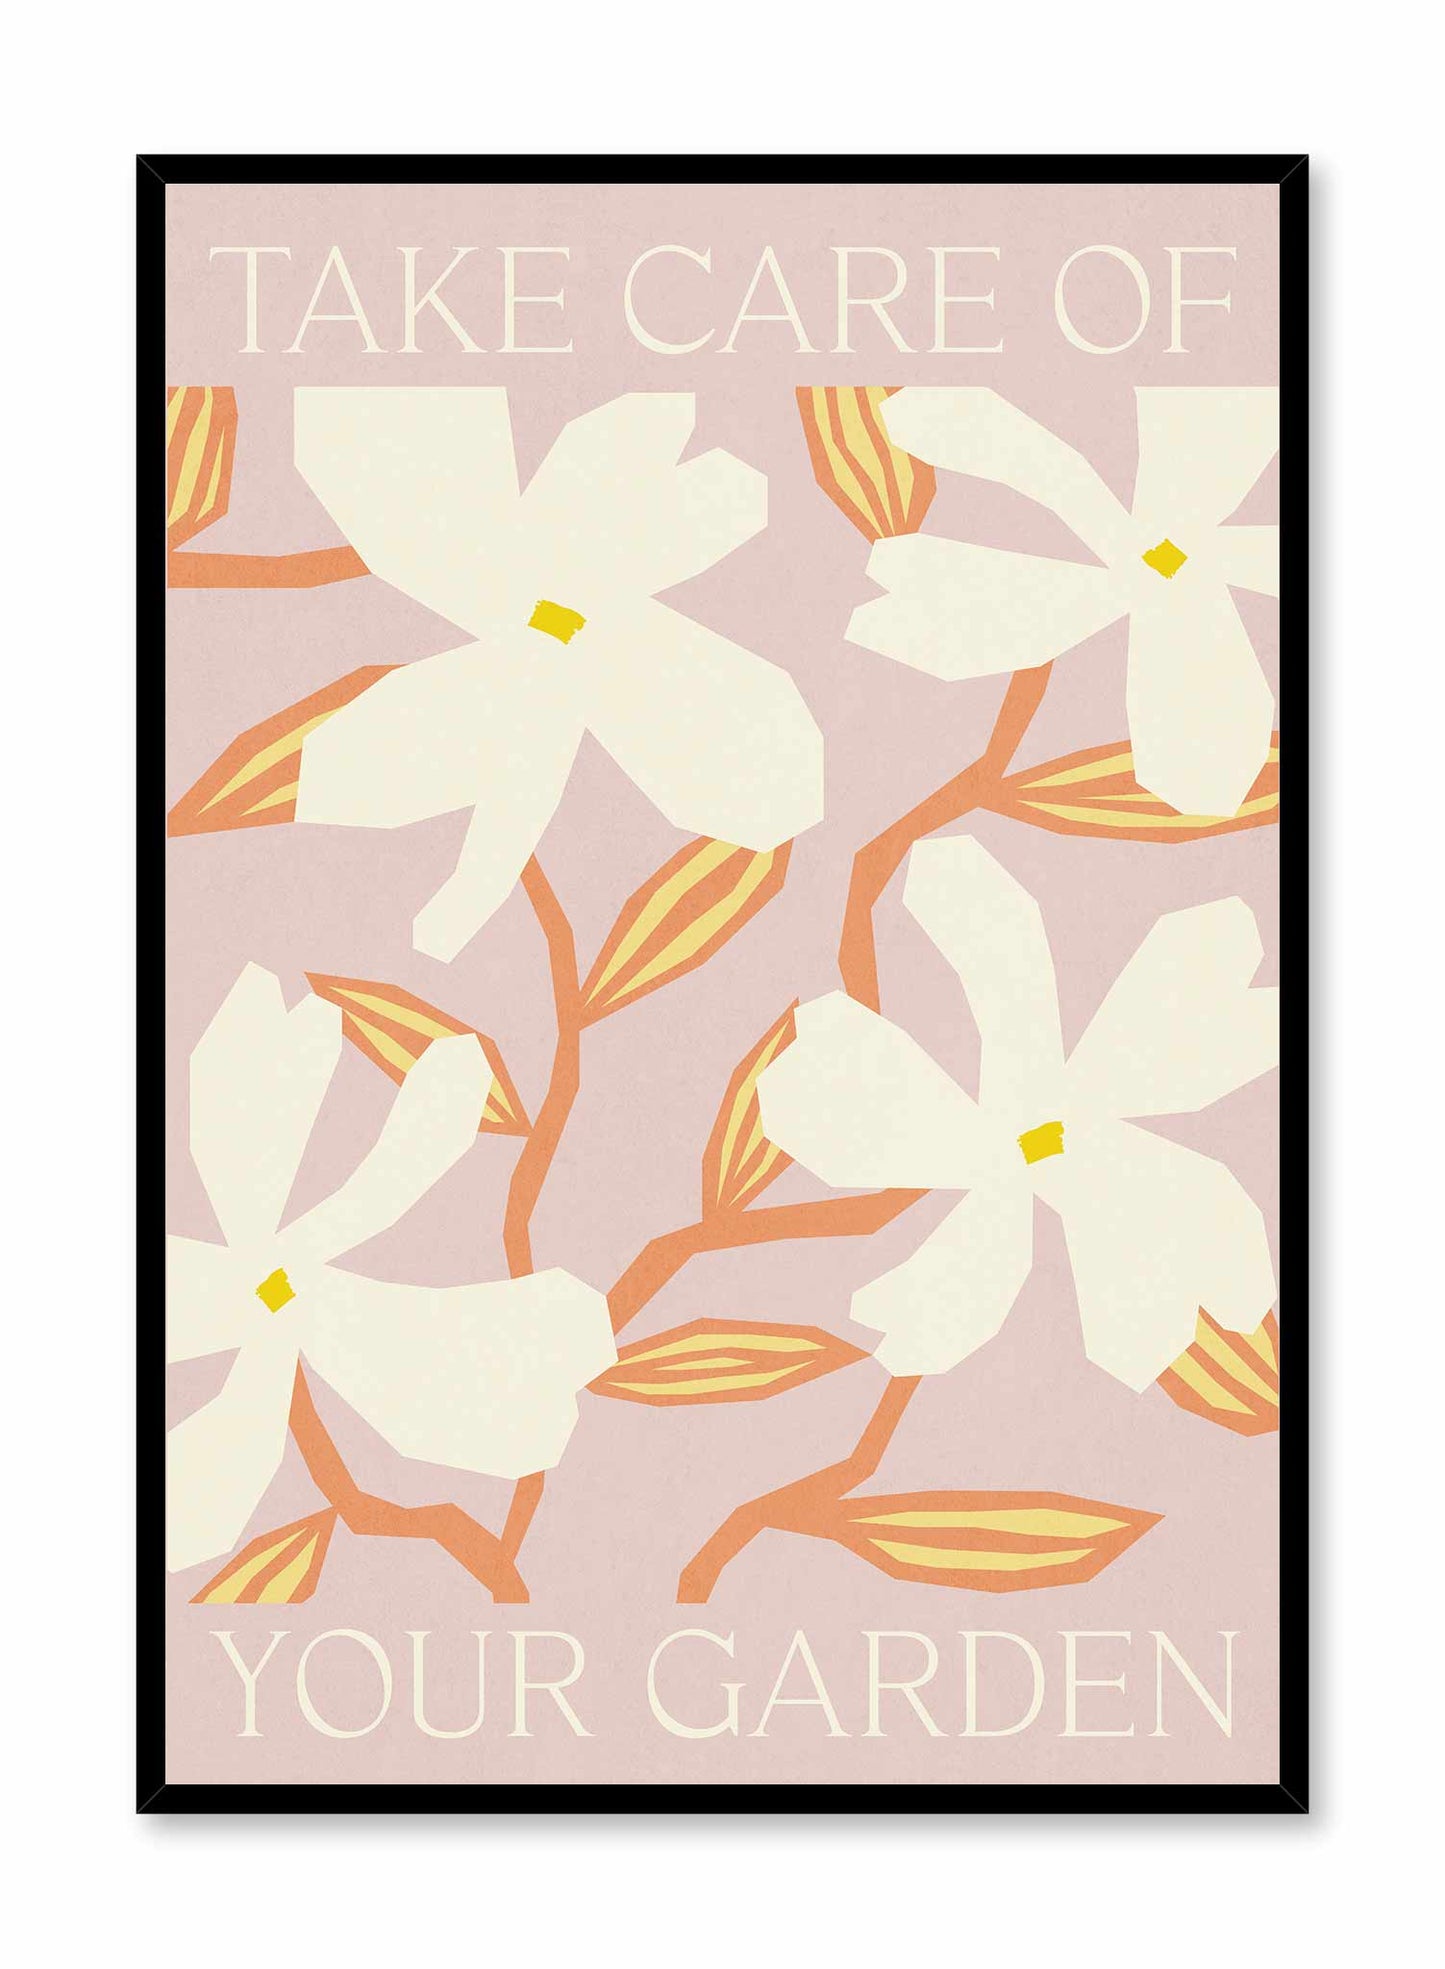 Self-Care Garden is a vector illustration of a patch of white flowers with bright orange and yellow leaves by Opposite Wall.